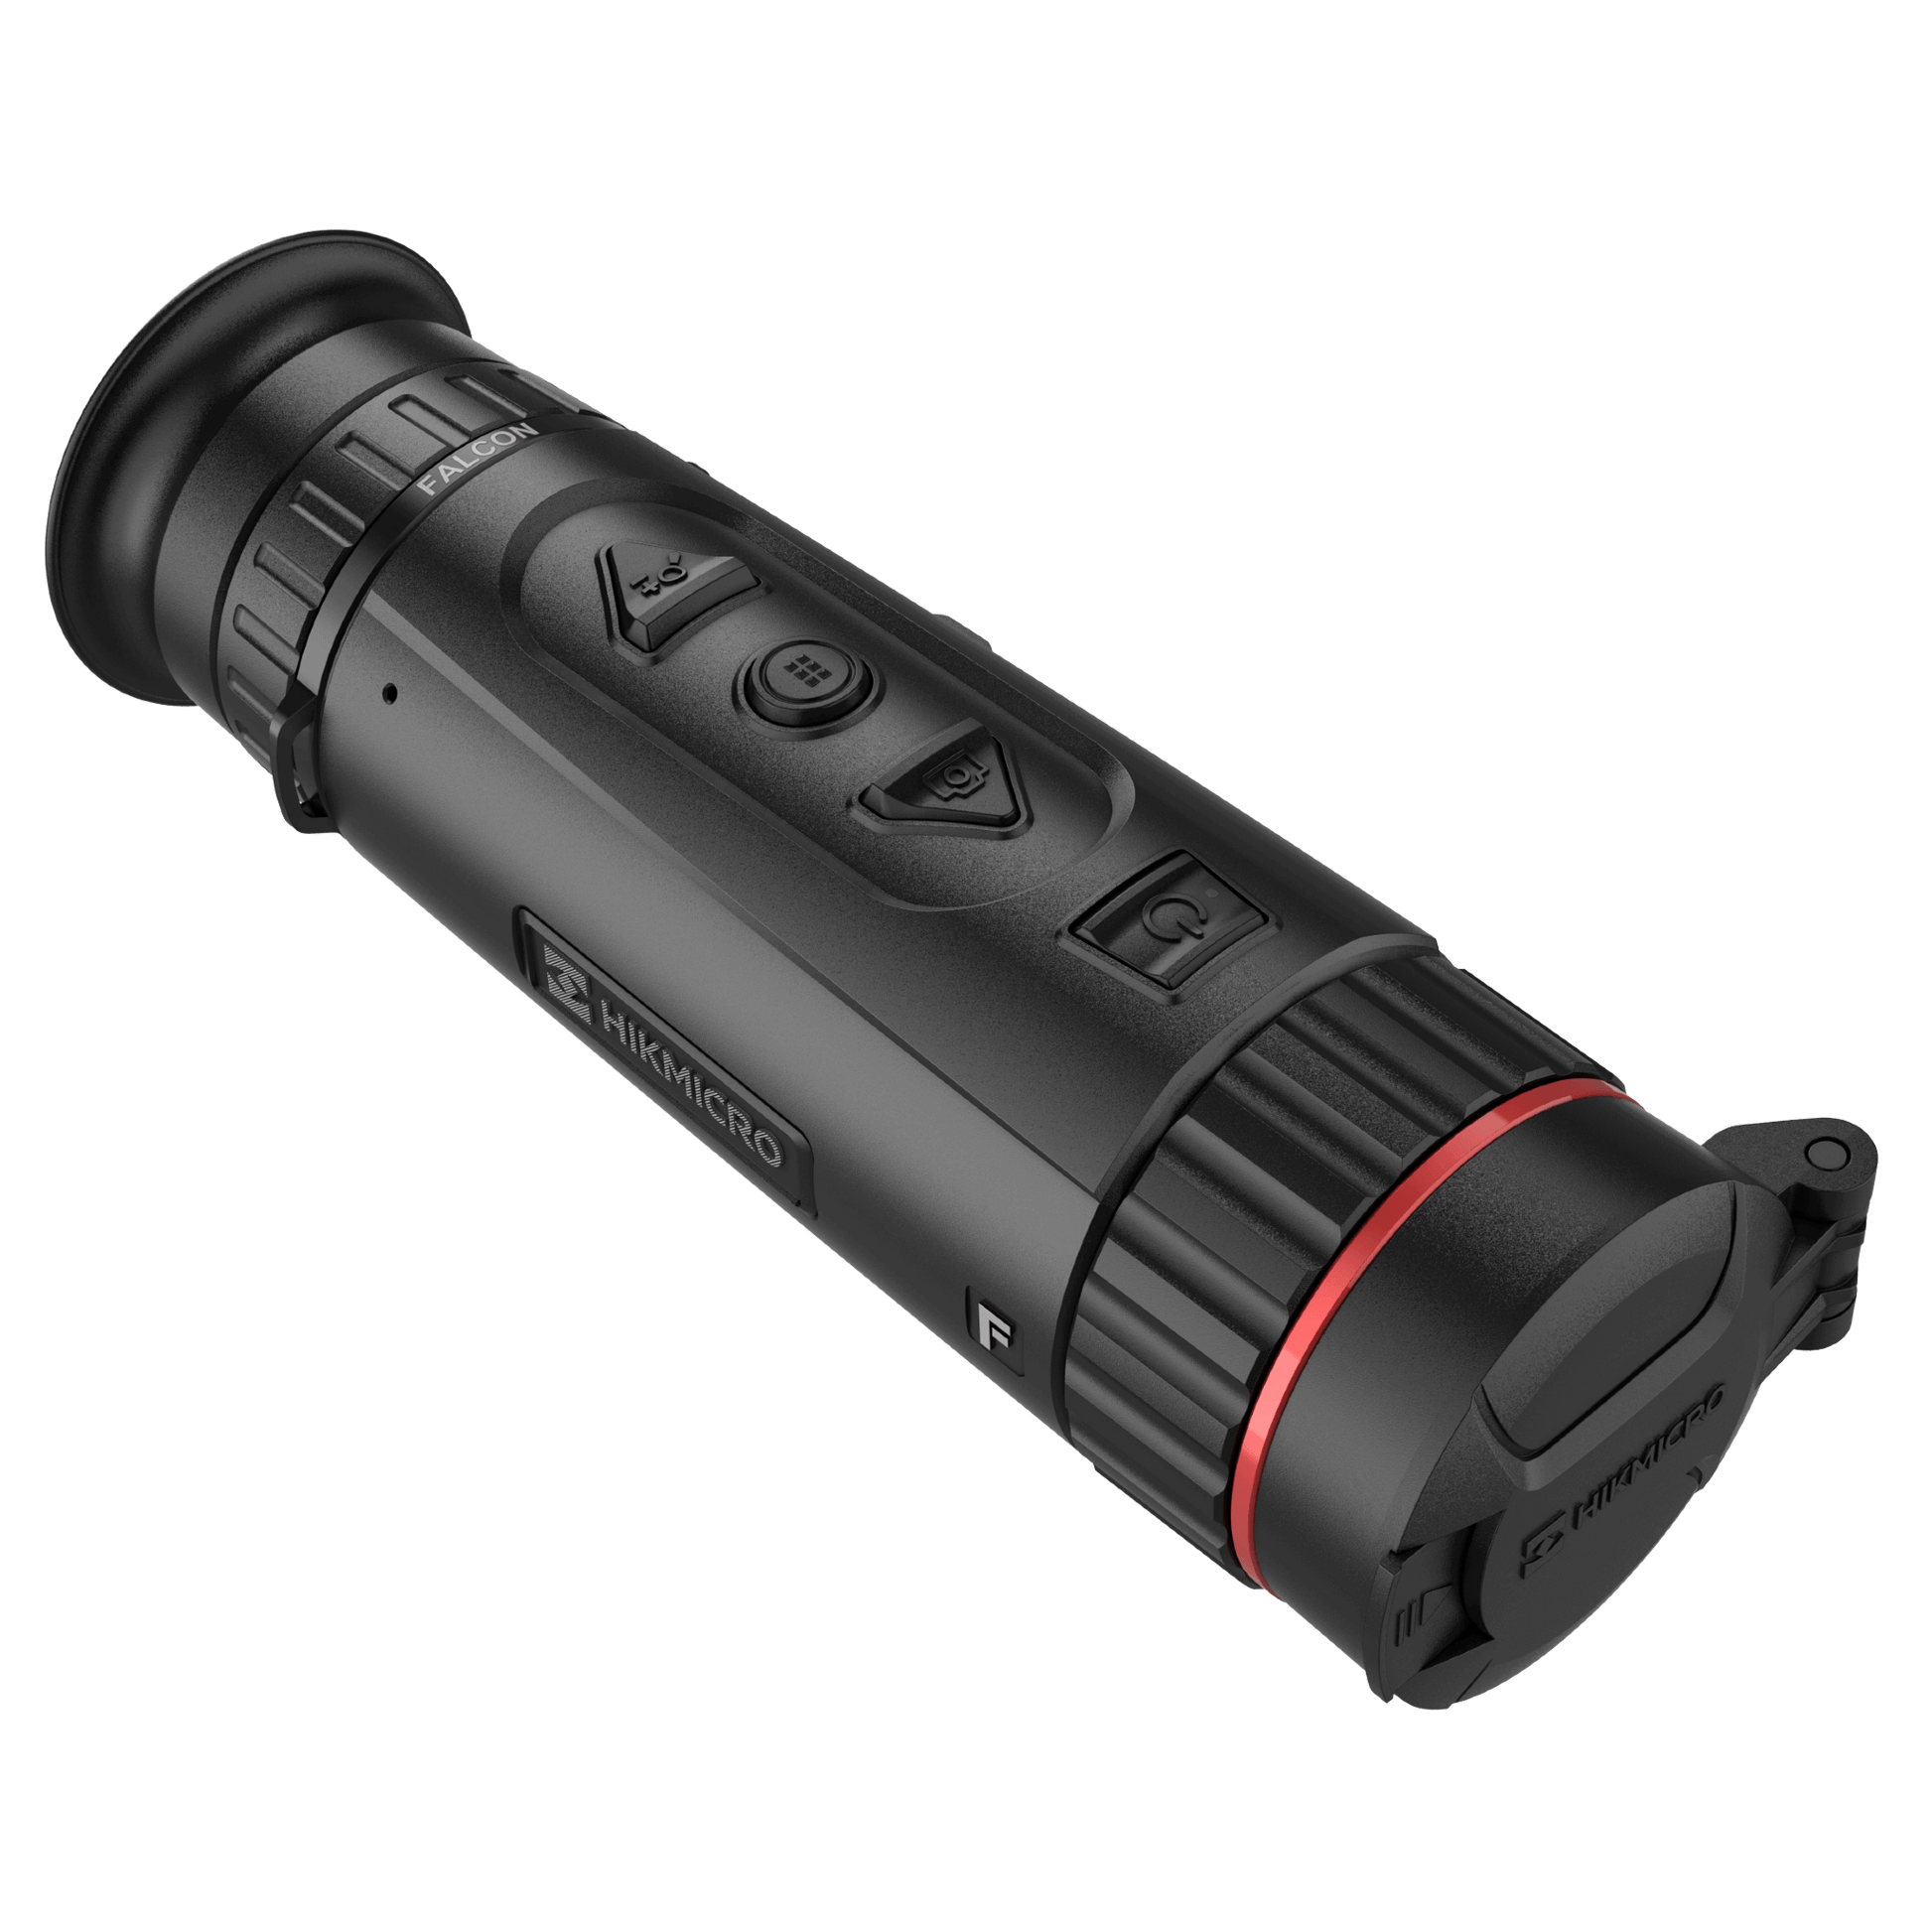 HikMicro Thermal Imaging Monocular for Sale - HikMicro Falcon Series FQ35 - HM-TS46-35XG_W-FQ35 - Front Right View from above